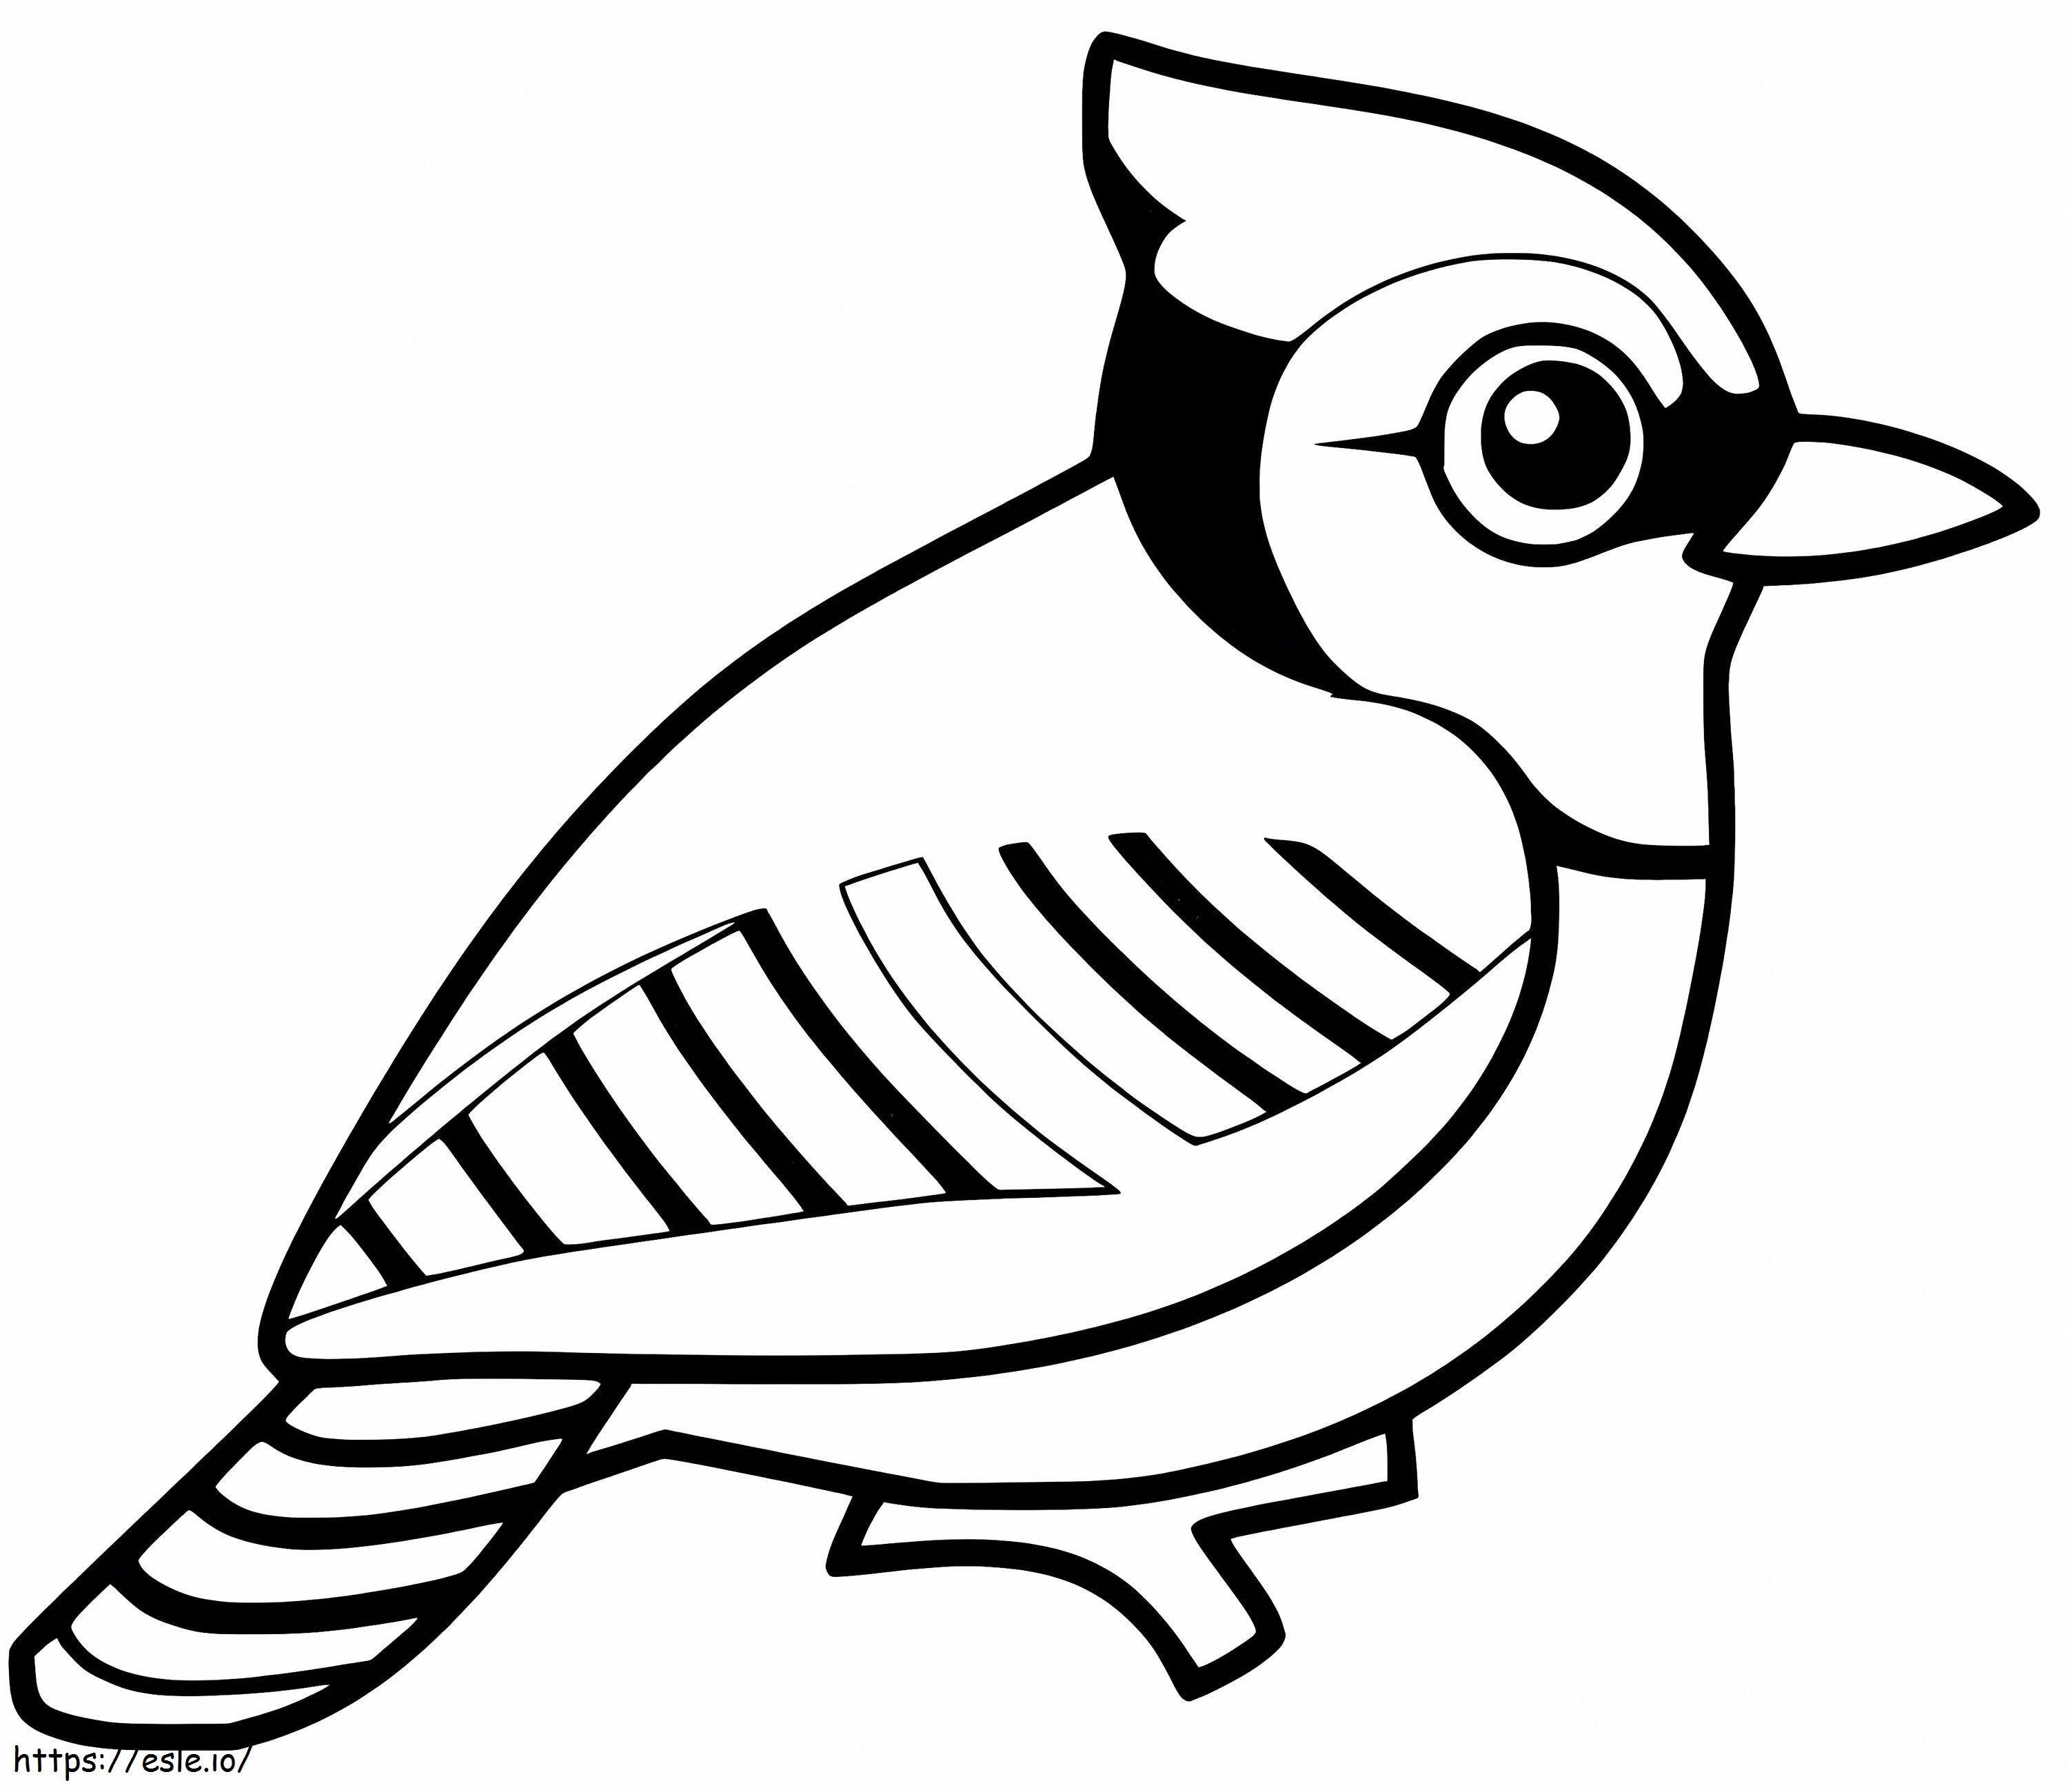 Blue Jay Coloring Pages - Free & Printable!